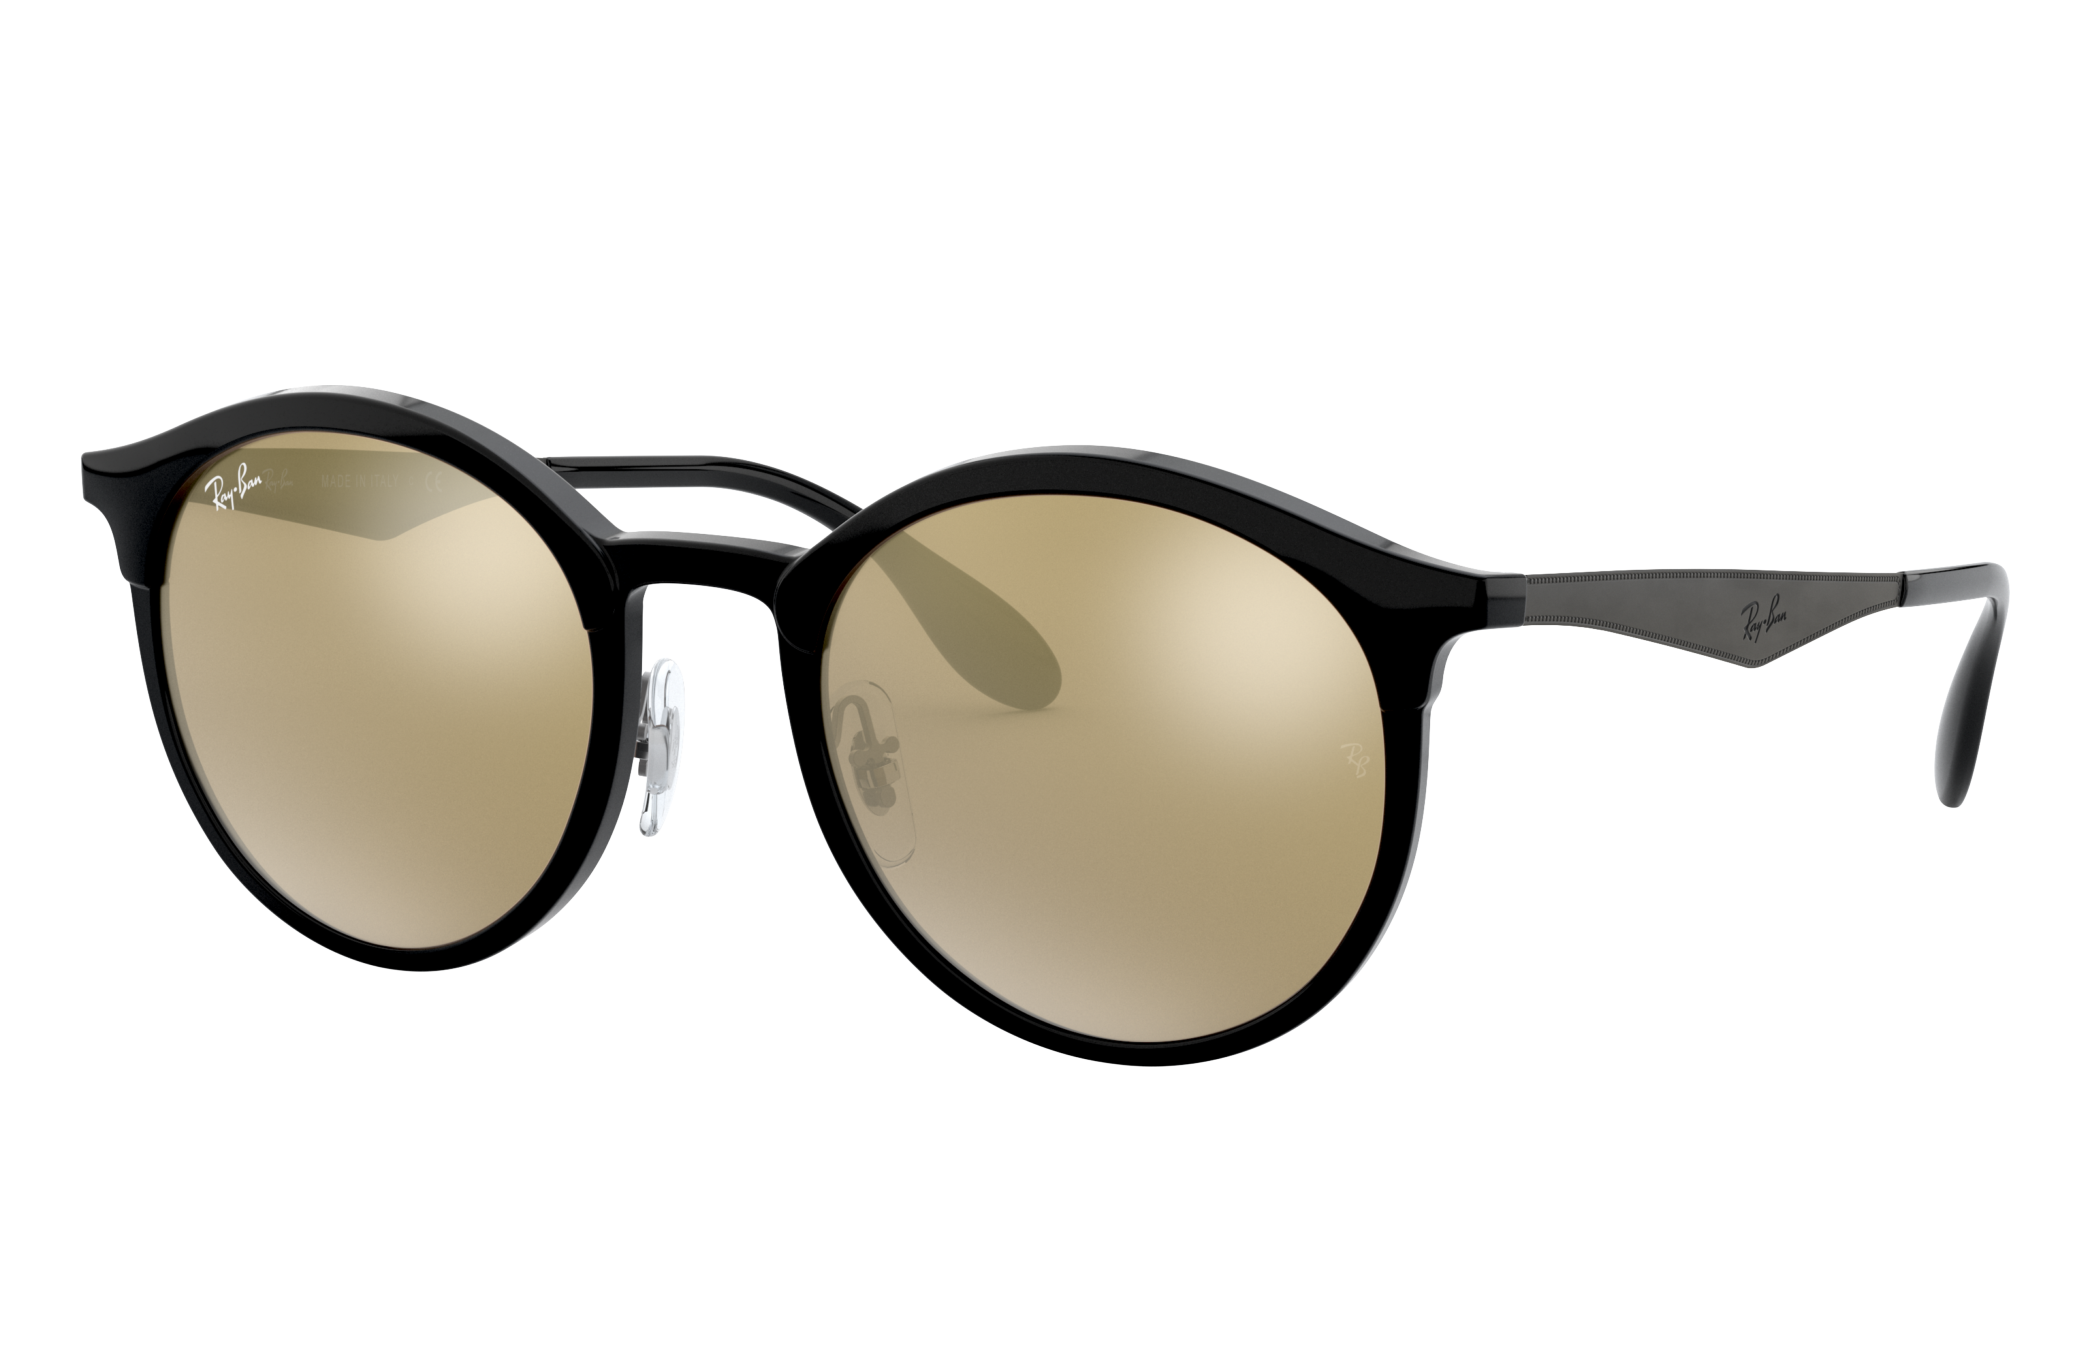 Emma Sunglasses in Black and Gold - RB4277F | Ray-Ban®